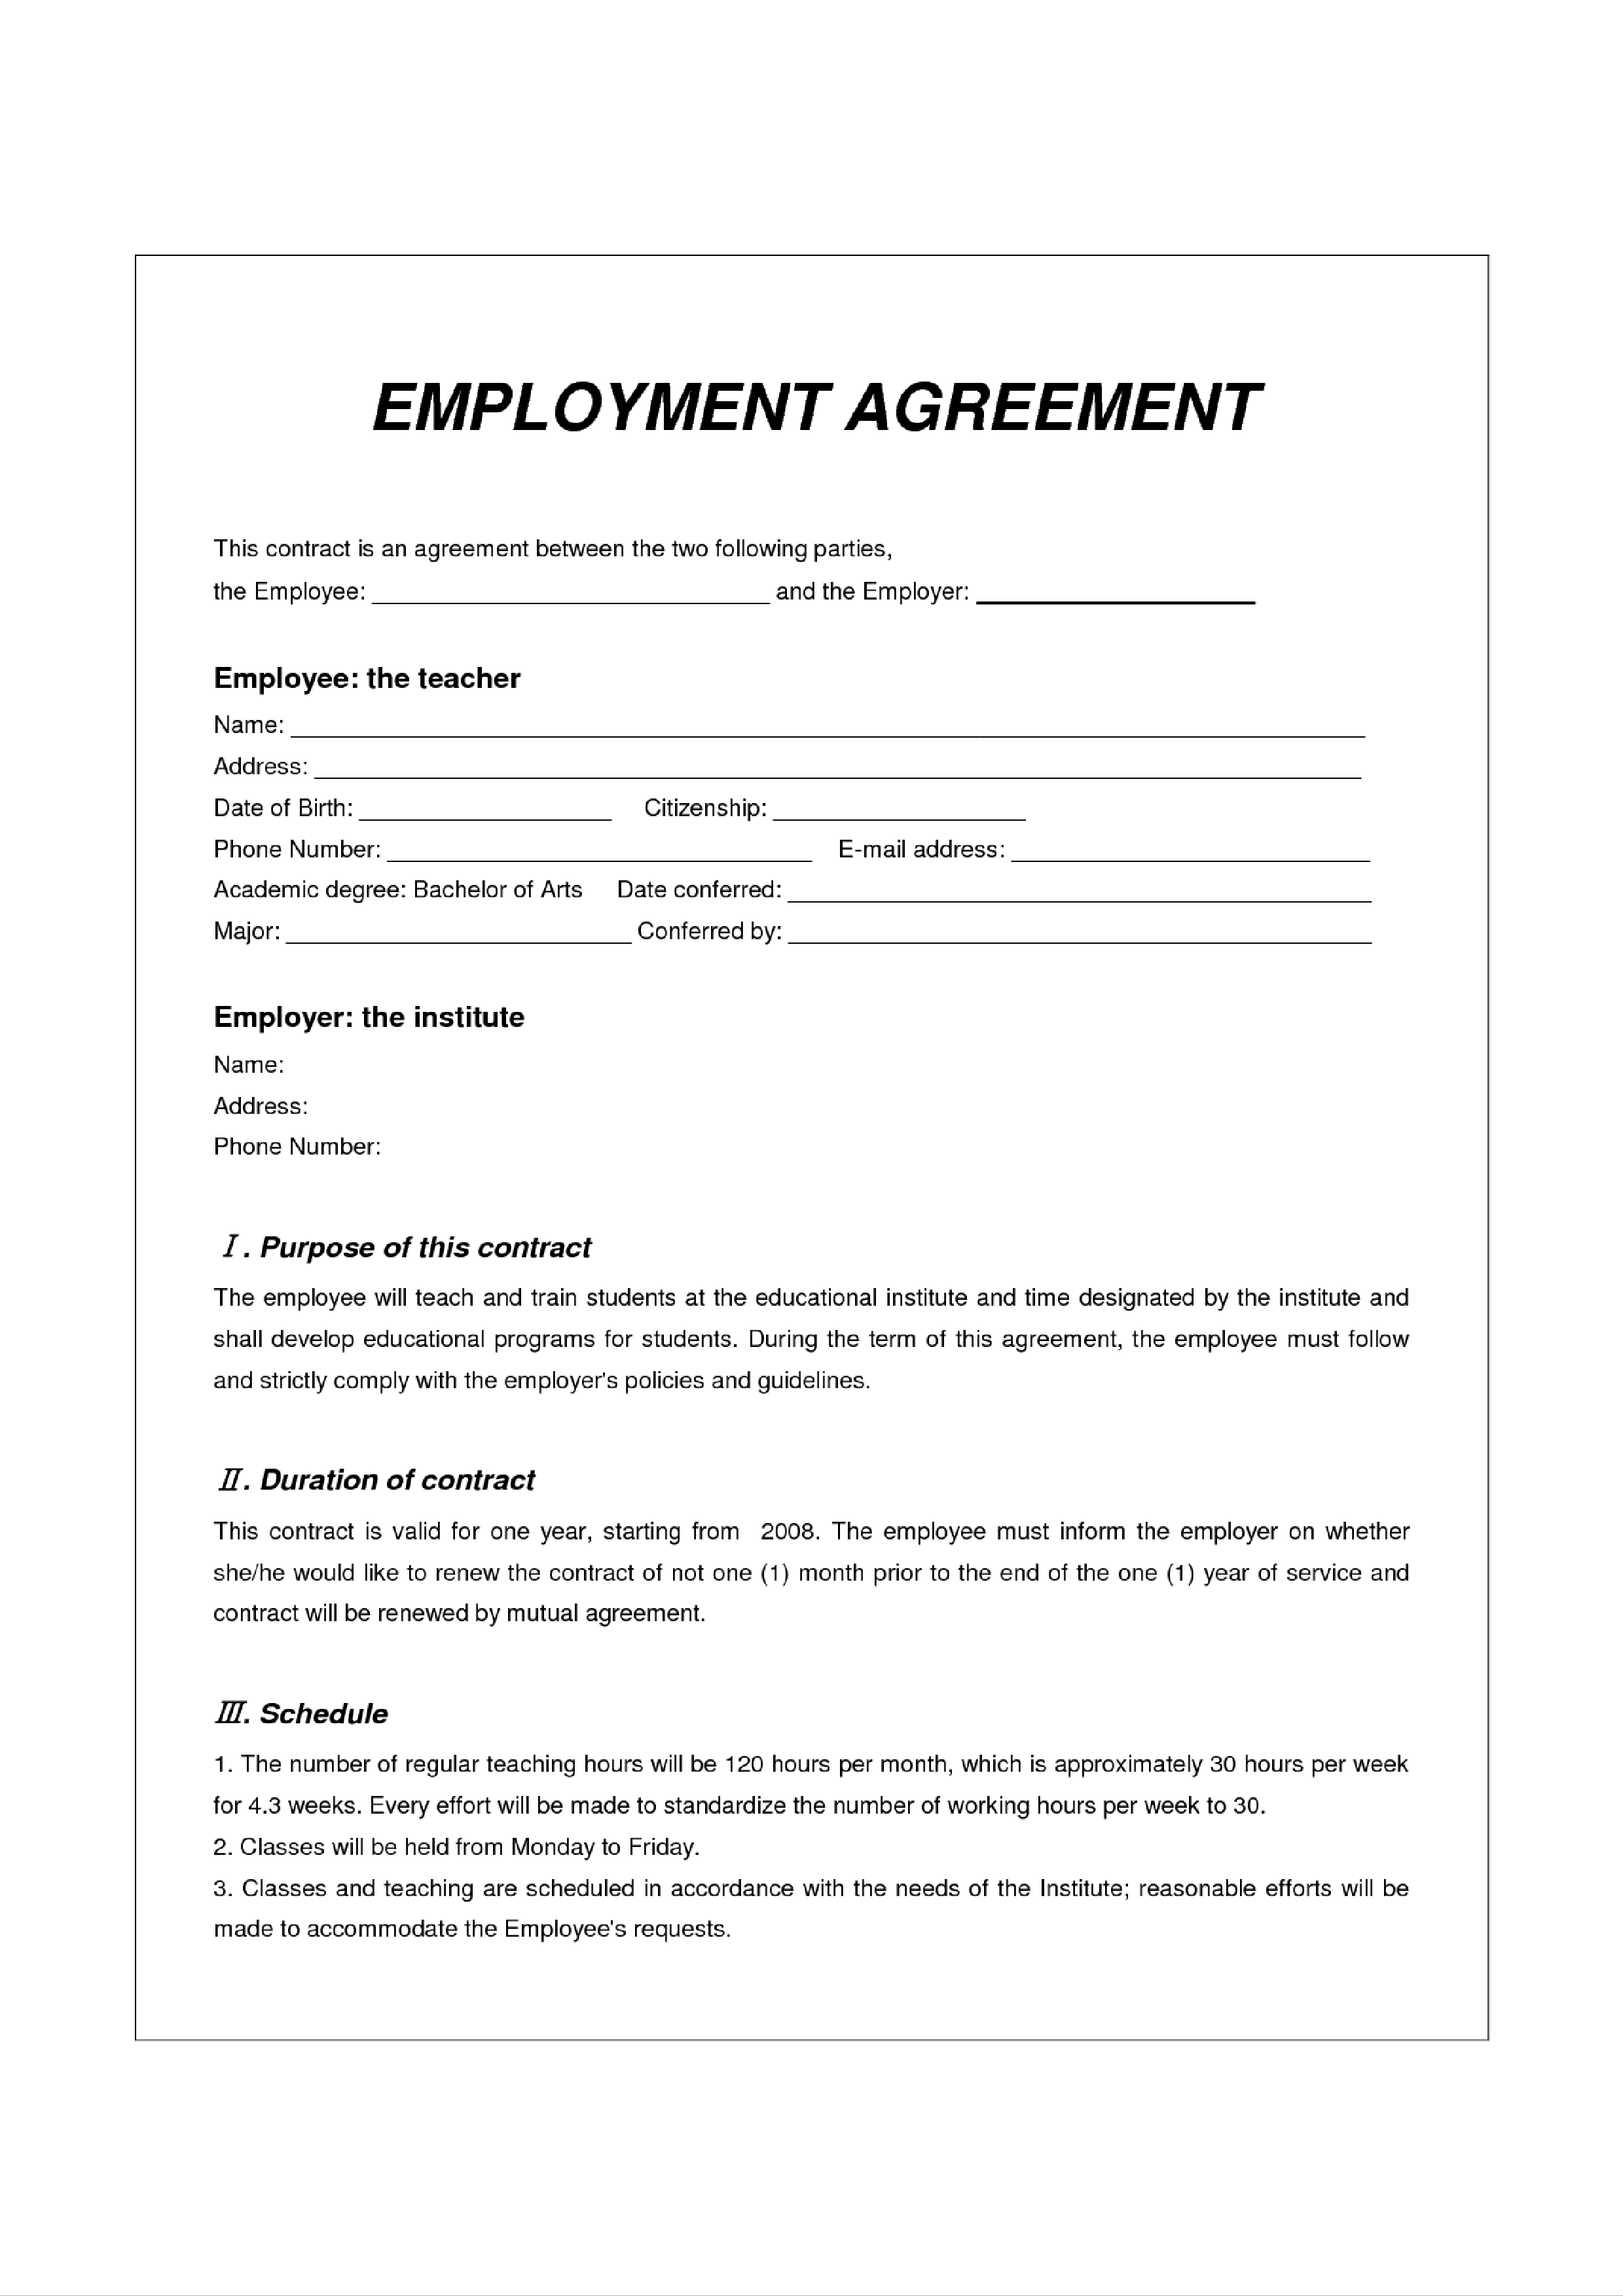 Employment Agreements Cafe 模板